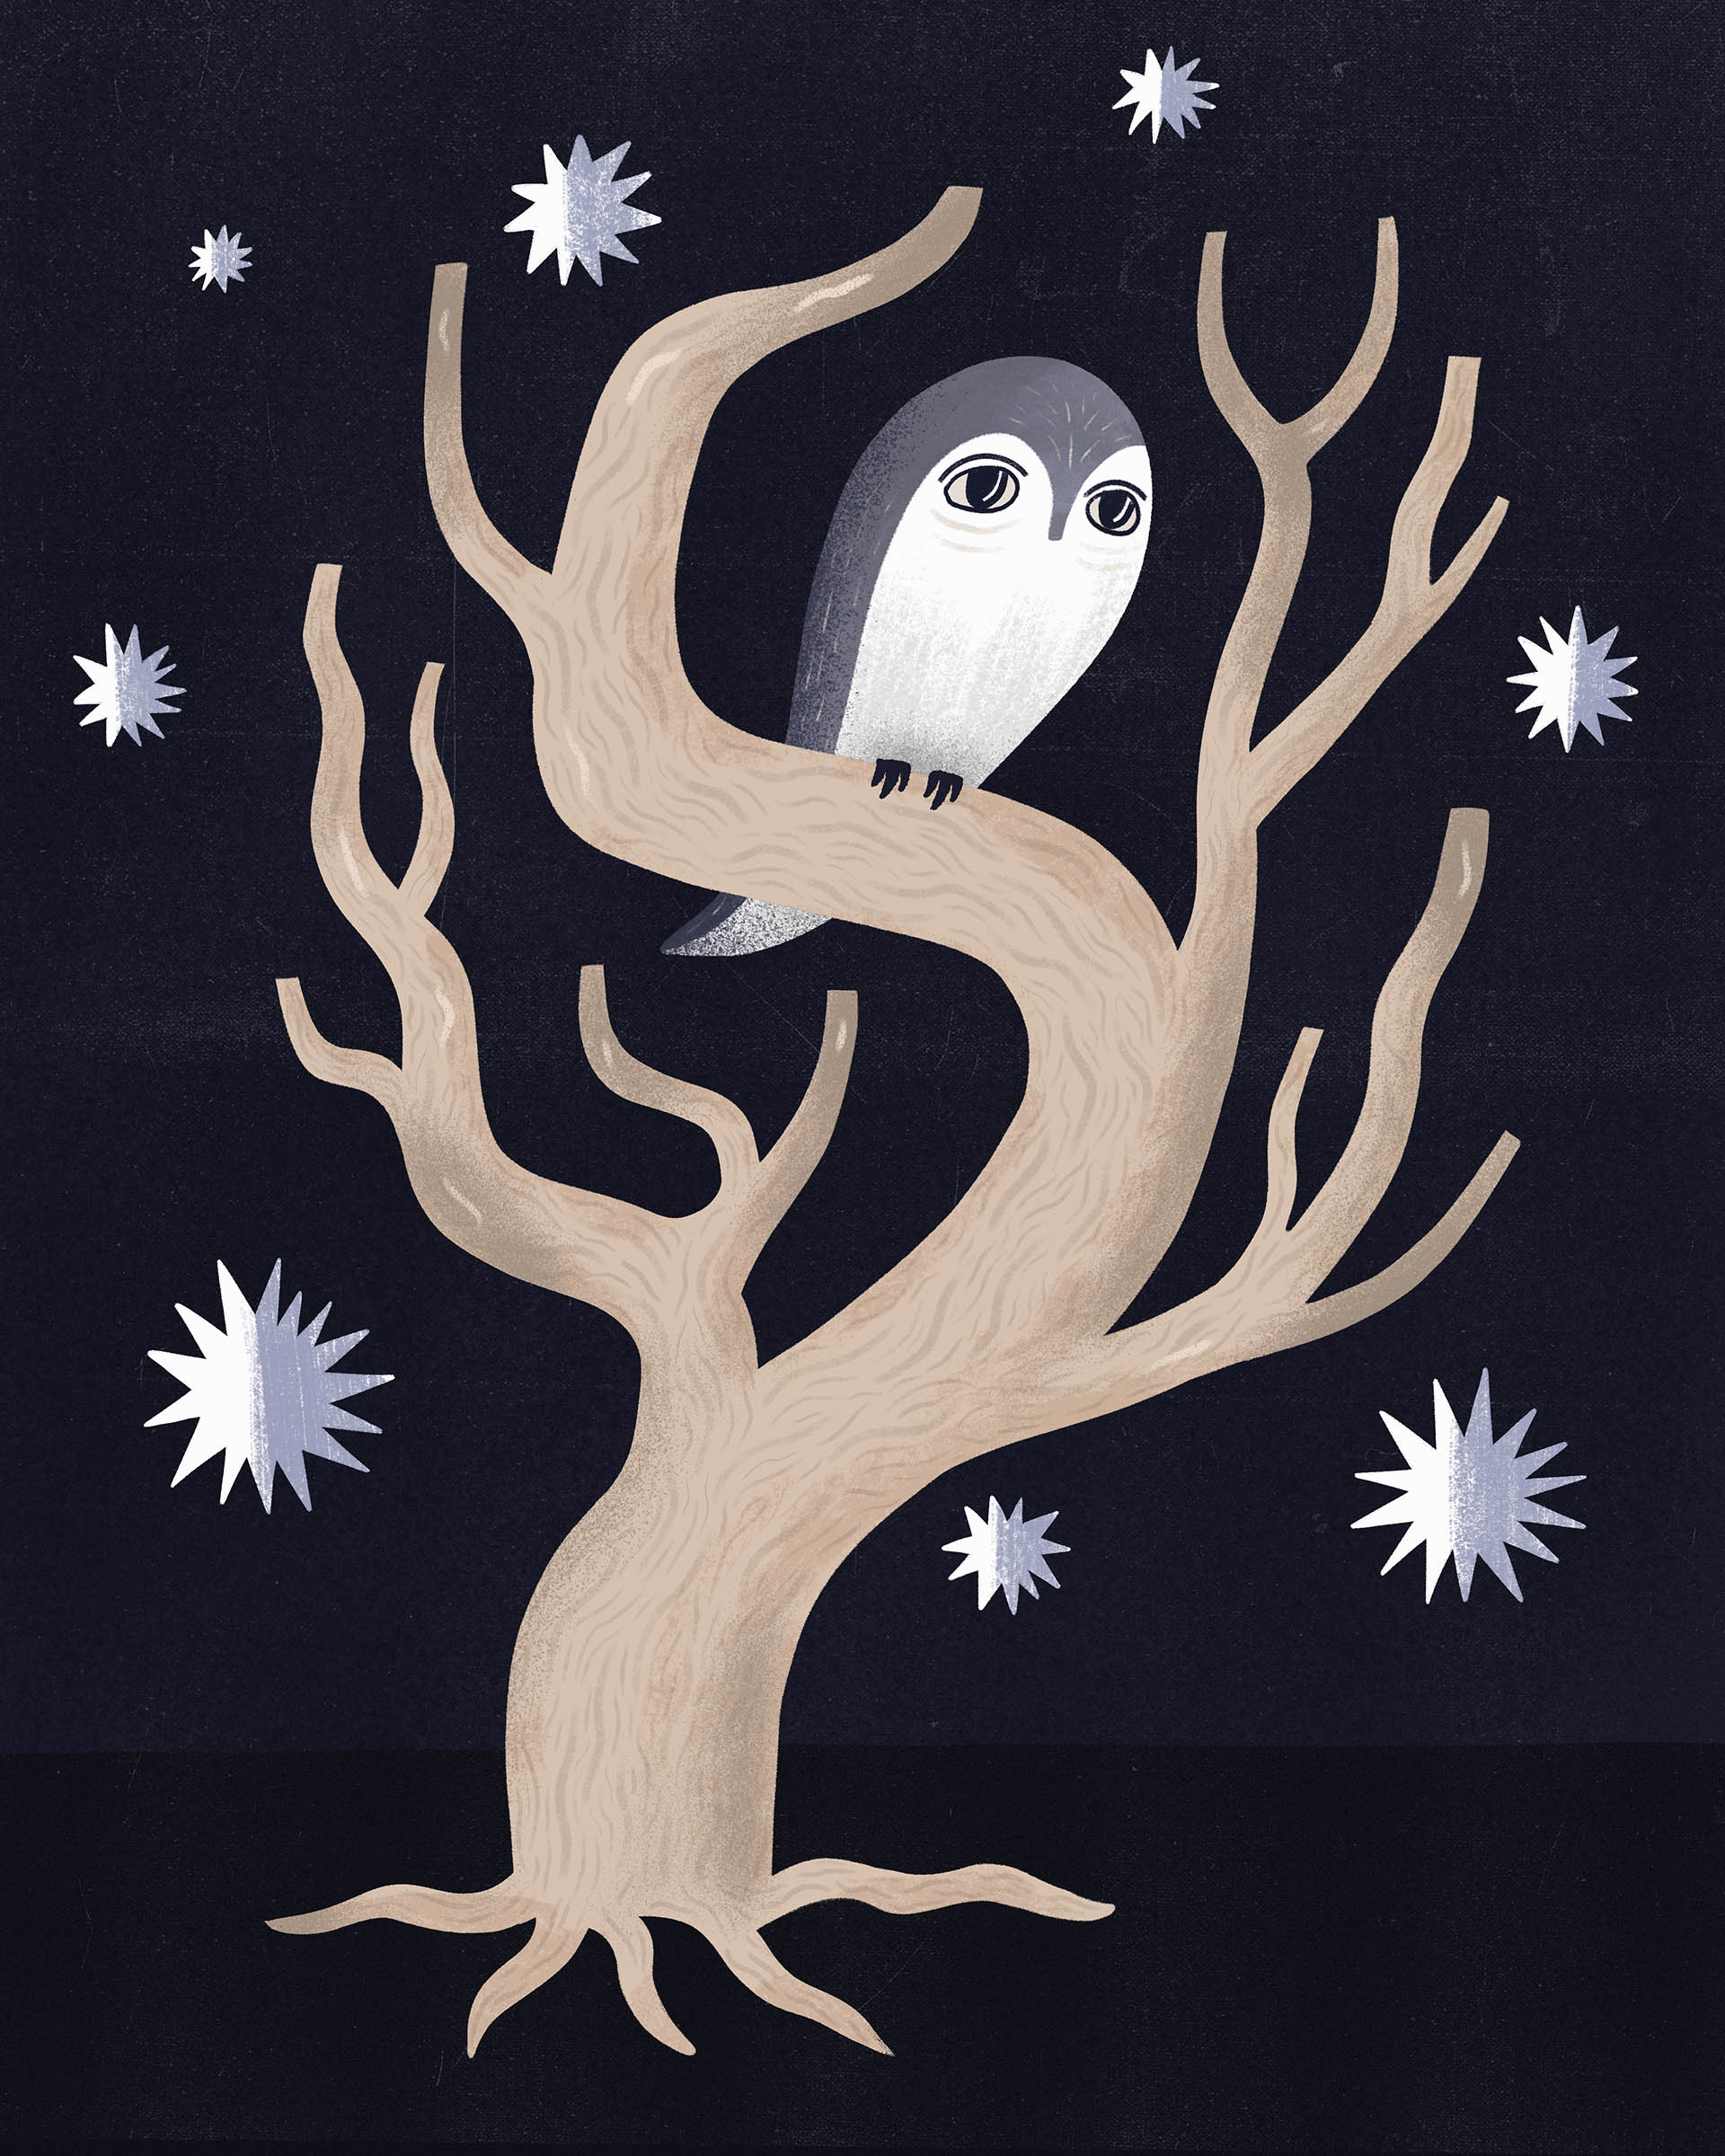 An owl sitting in a tree during night. Stars are seen in the background.